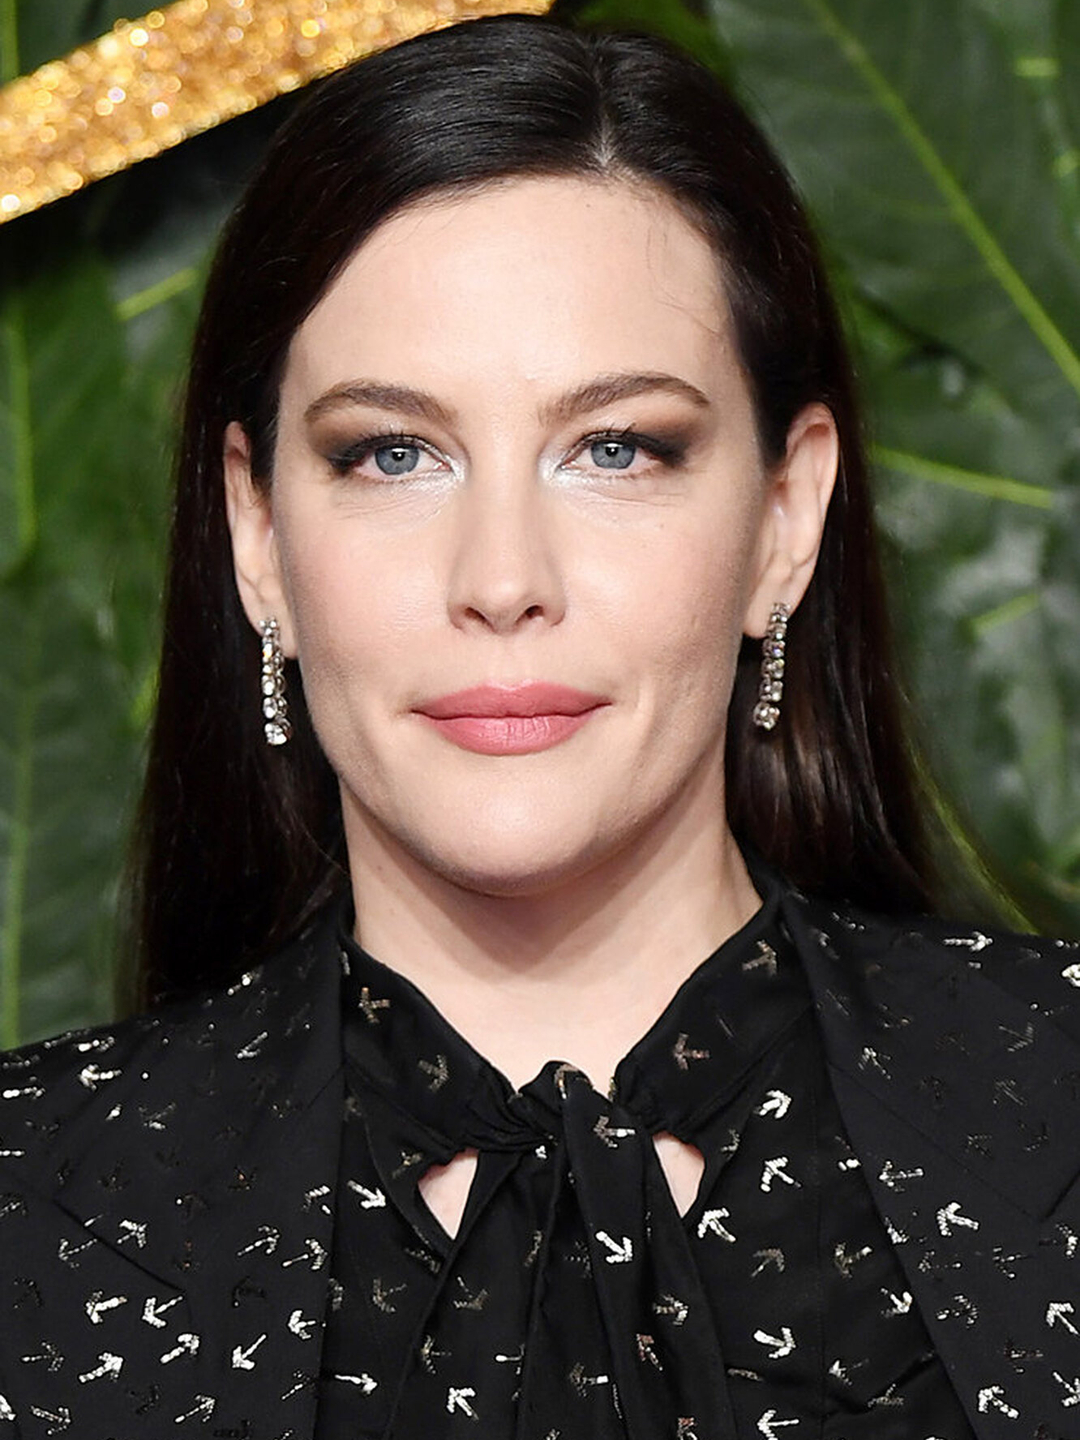 Liv Tyler personal traits